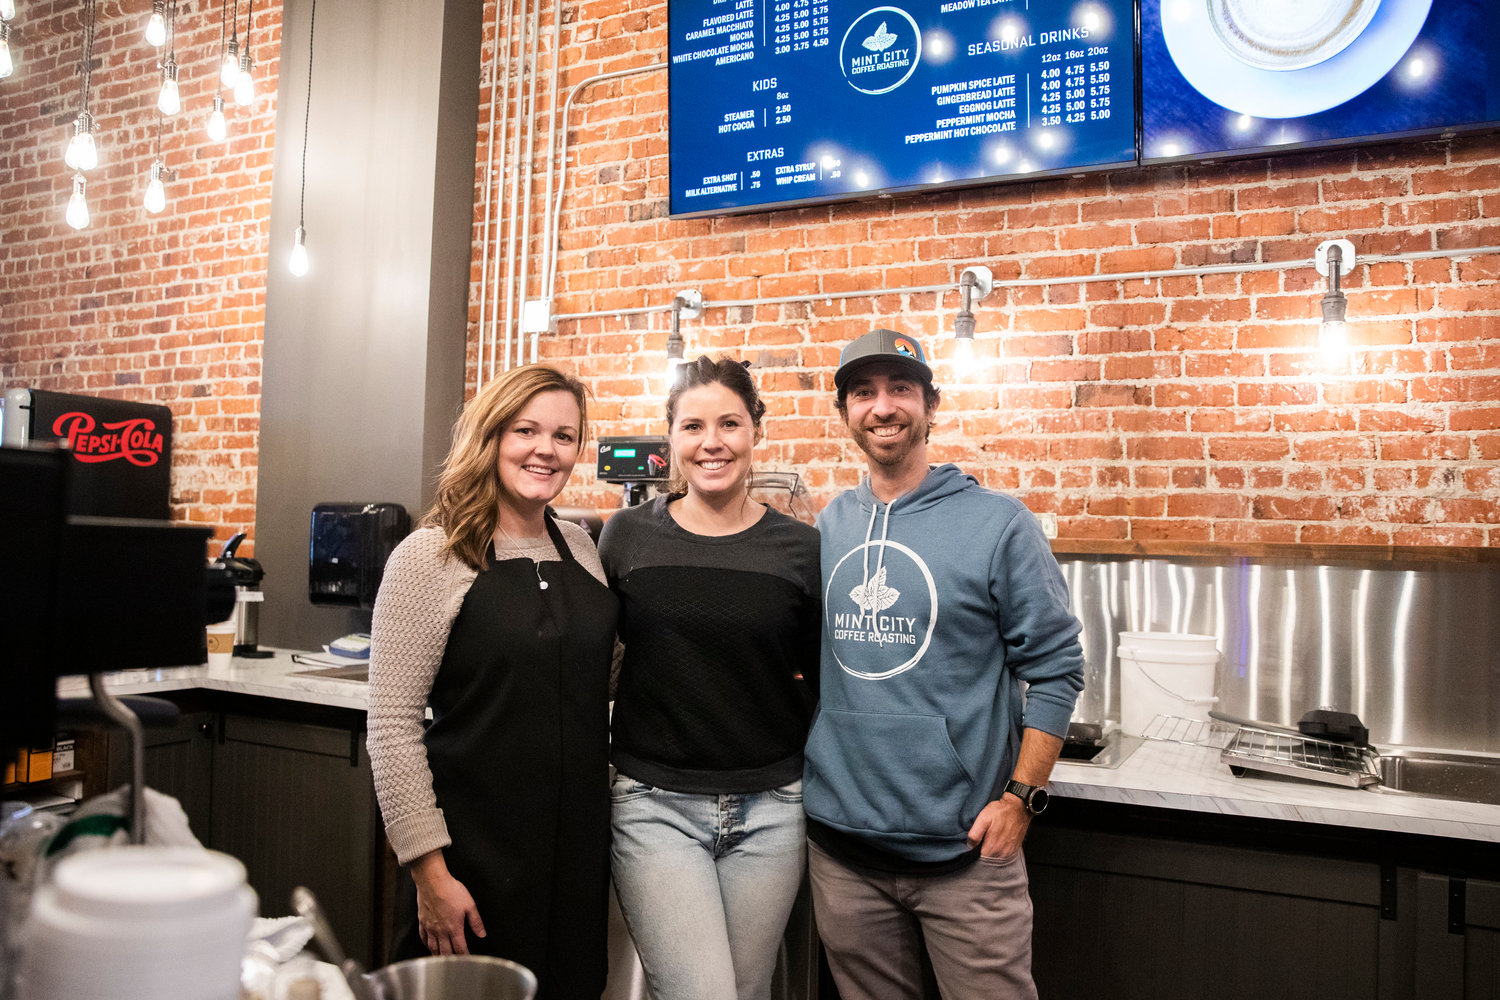 Shawna Boettner smiles for a photo alongside Sarah and Kyle Askin Tuesday morning on opening day at Mint City Coffee Roasting in Chehalis.